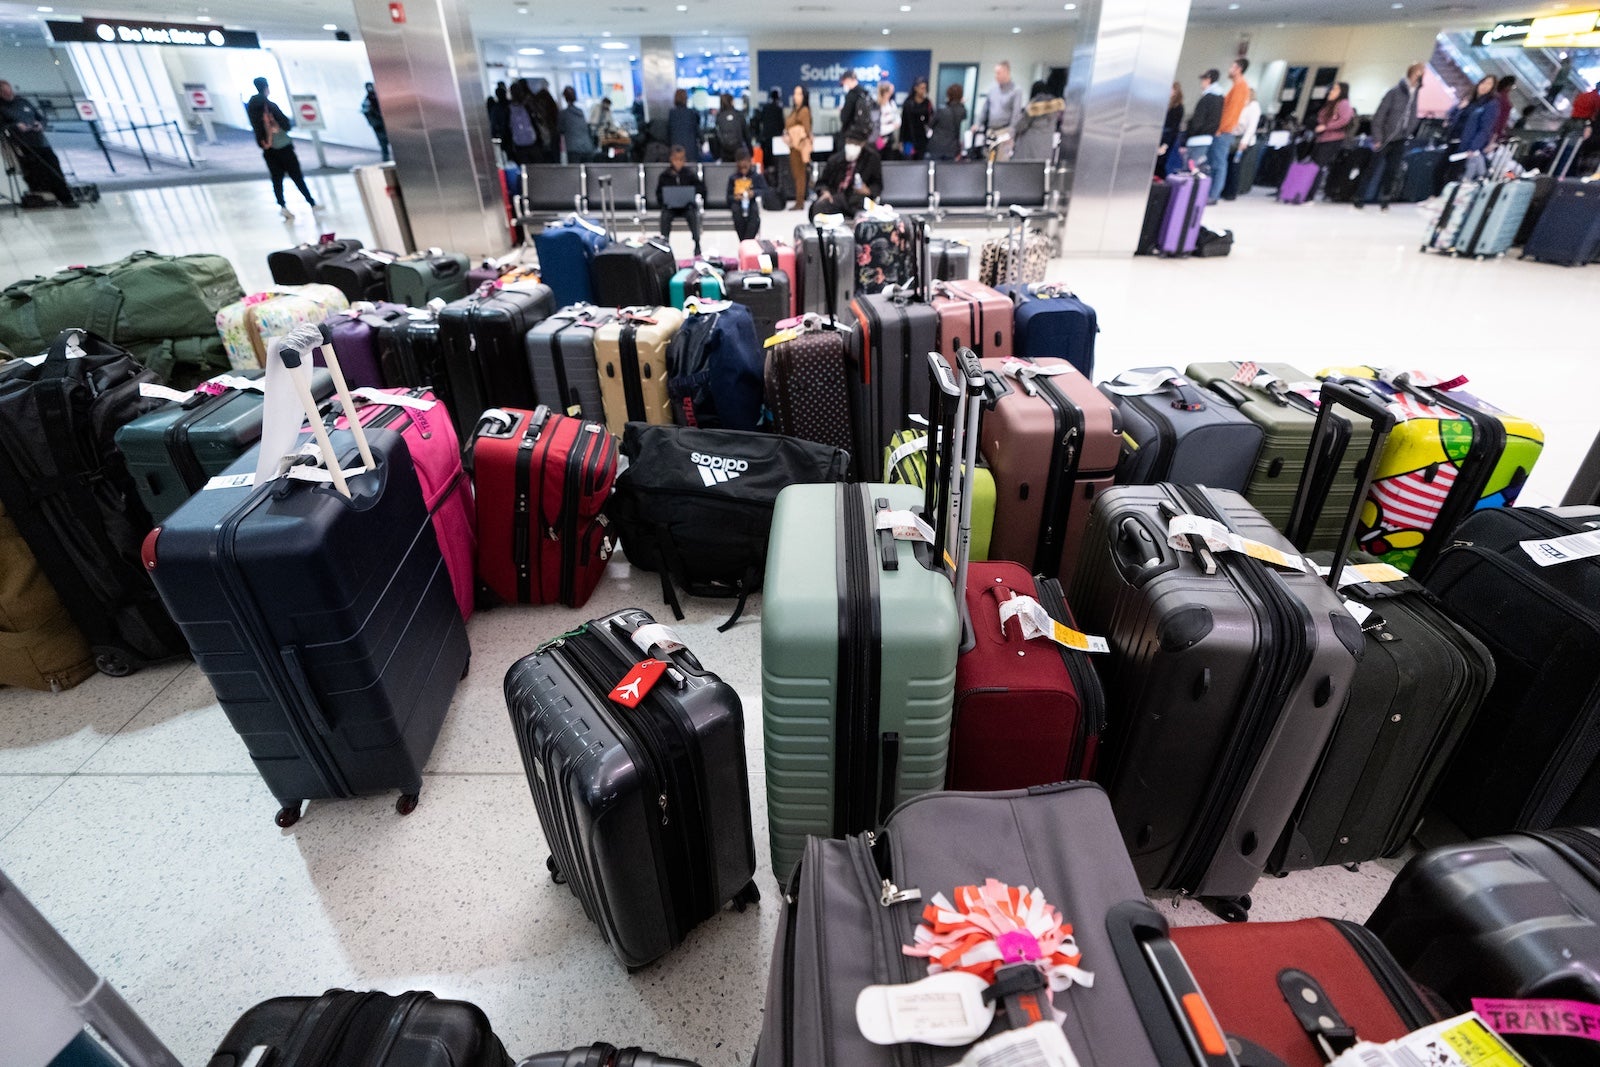 Are you missing your wigs or maybe a wooden fertility doll? Here’s what the 2023 Unclaimed Baggage Report found